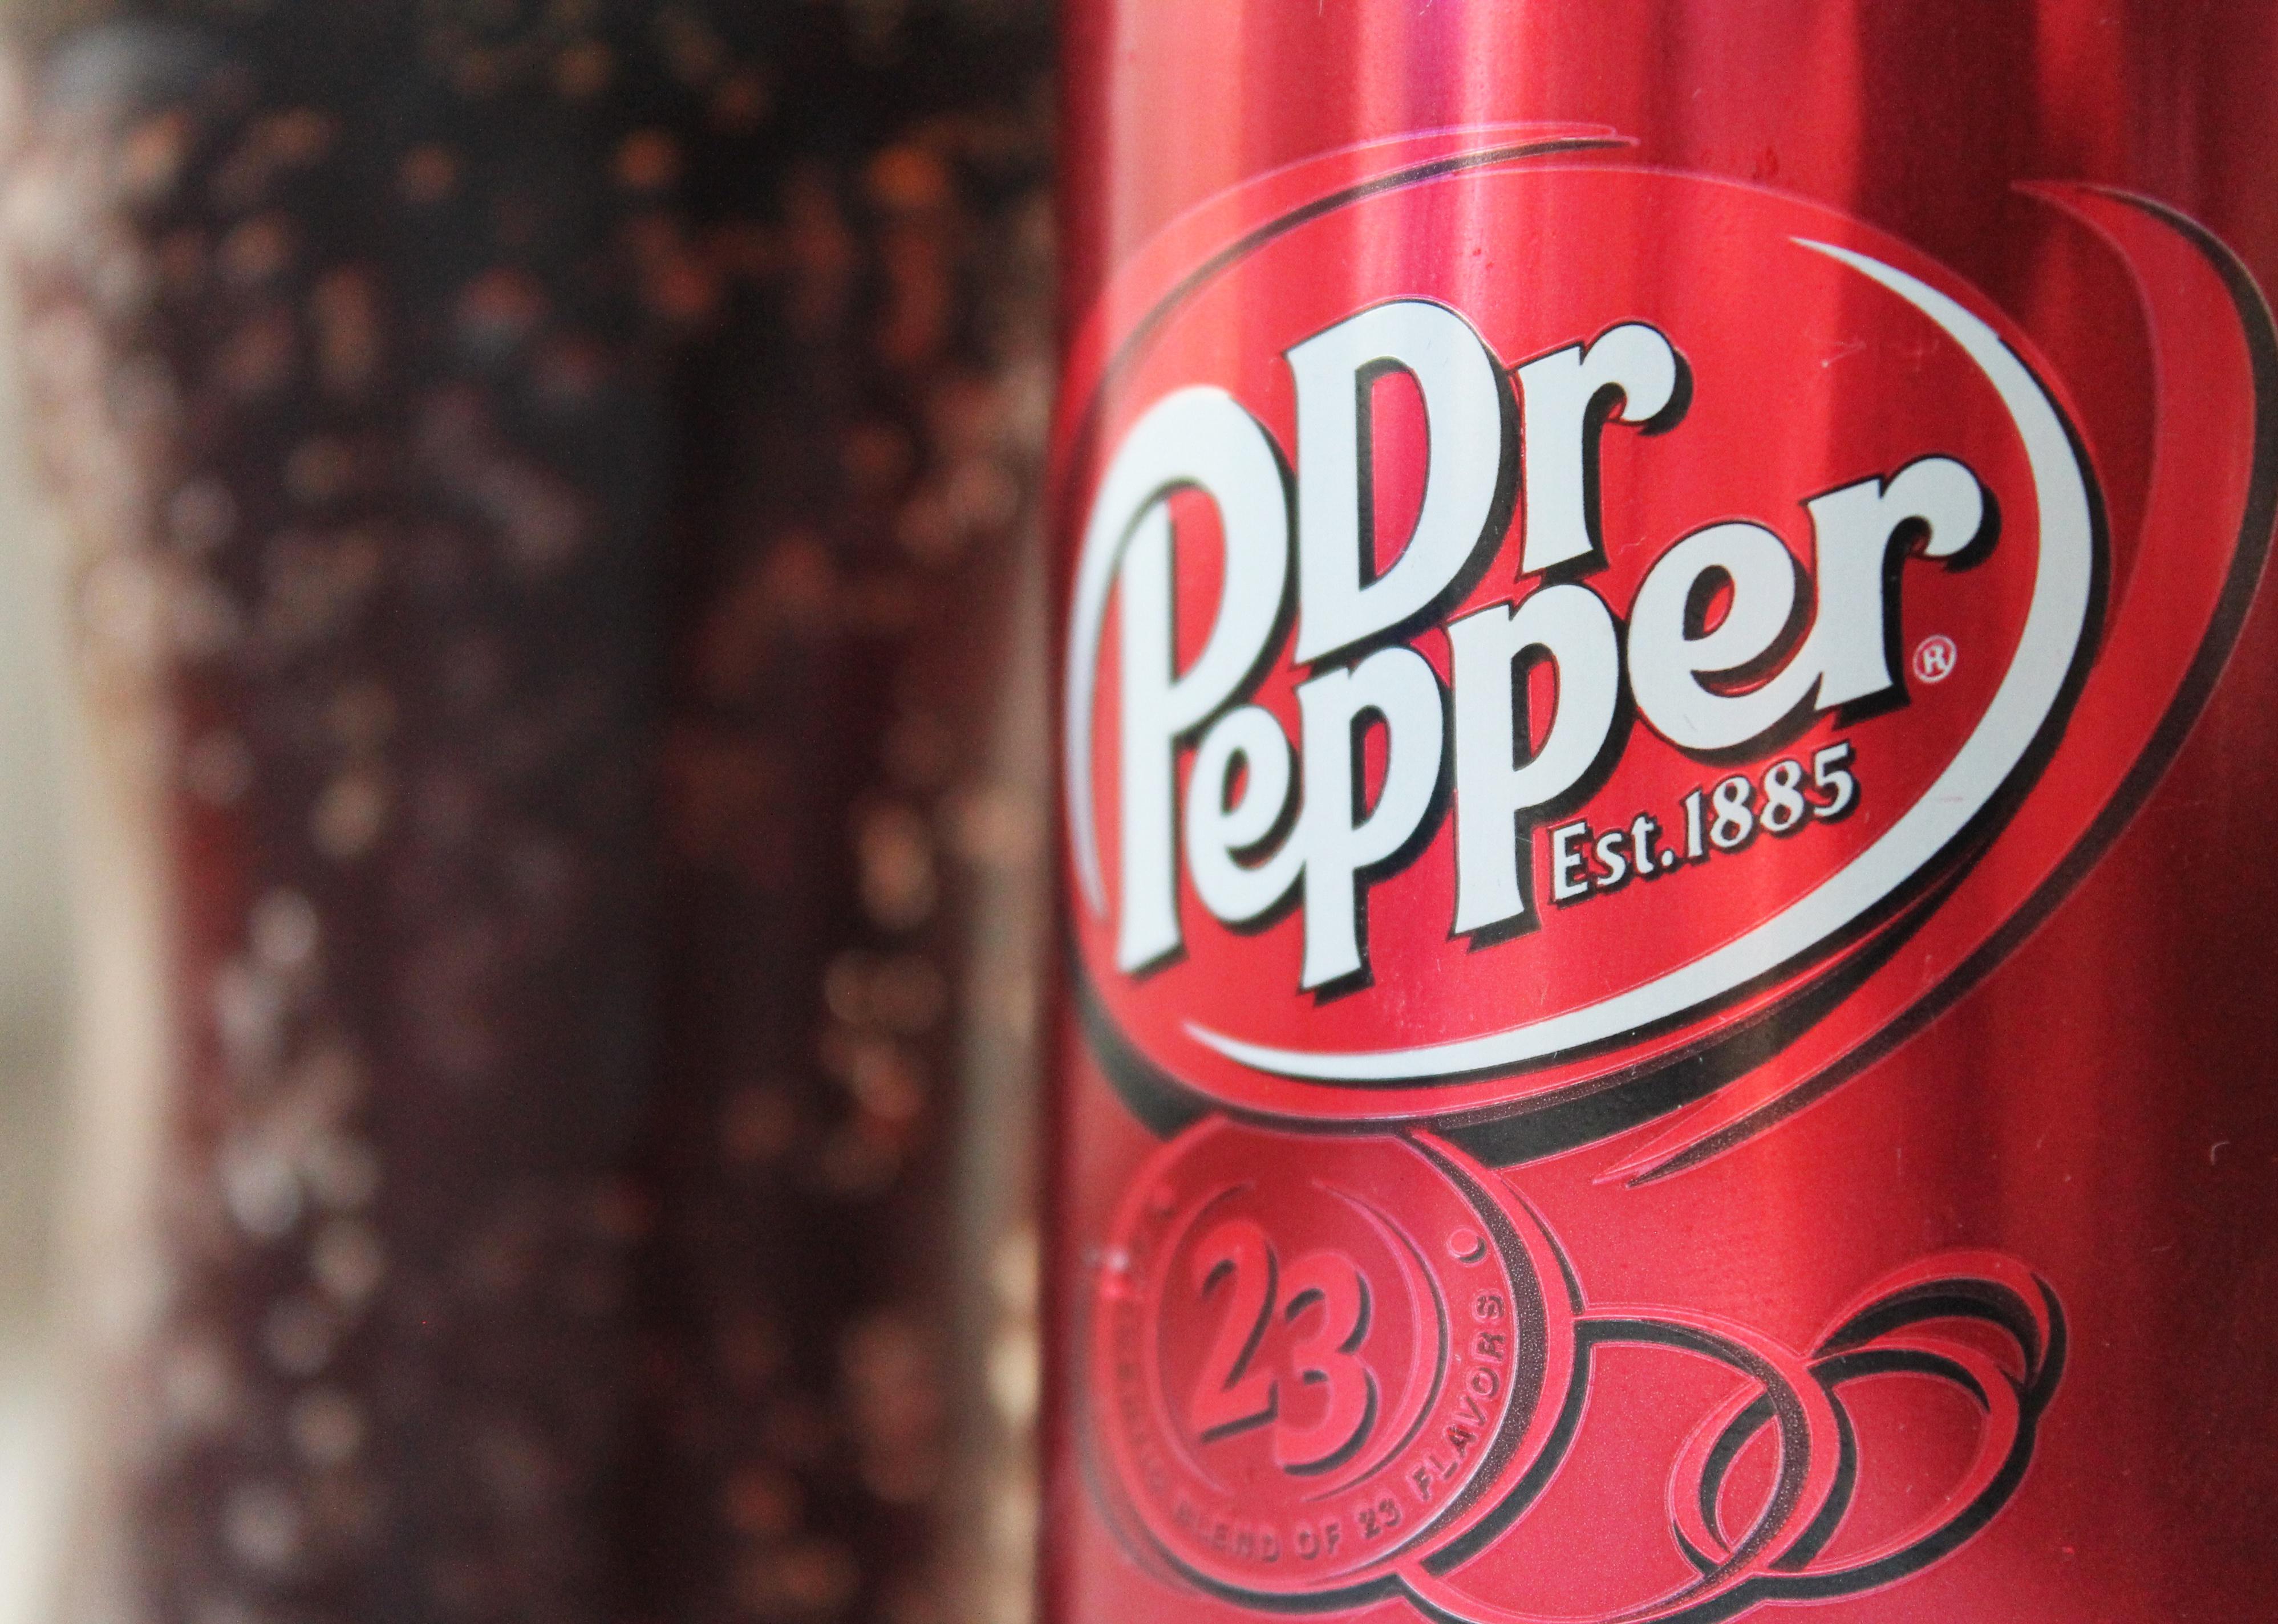 Close up of Dr Pepper logo on a can.